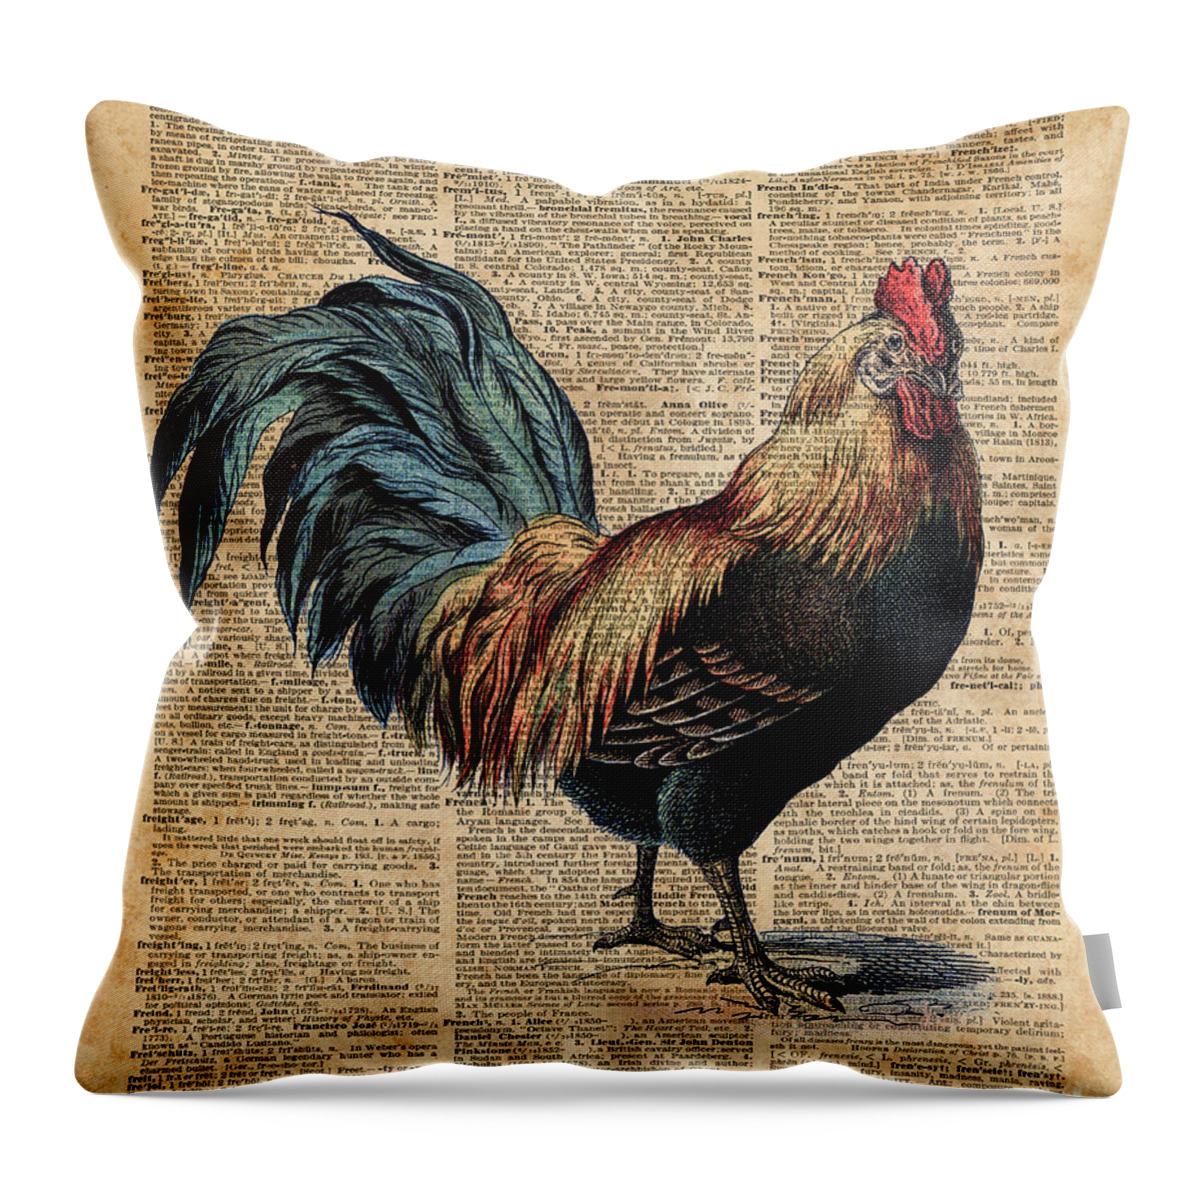 Art Throw Pillow featuring the digital art Cottage Rooster Illustration Vintage Dictionary Book Page by Anna W